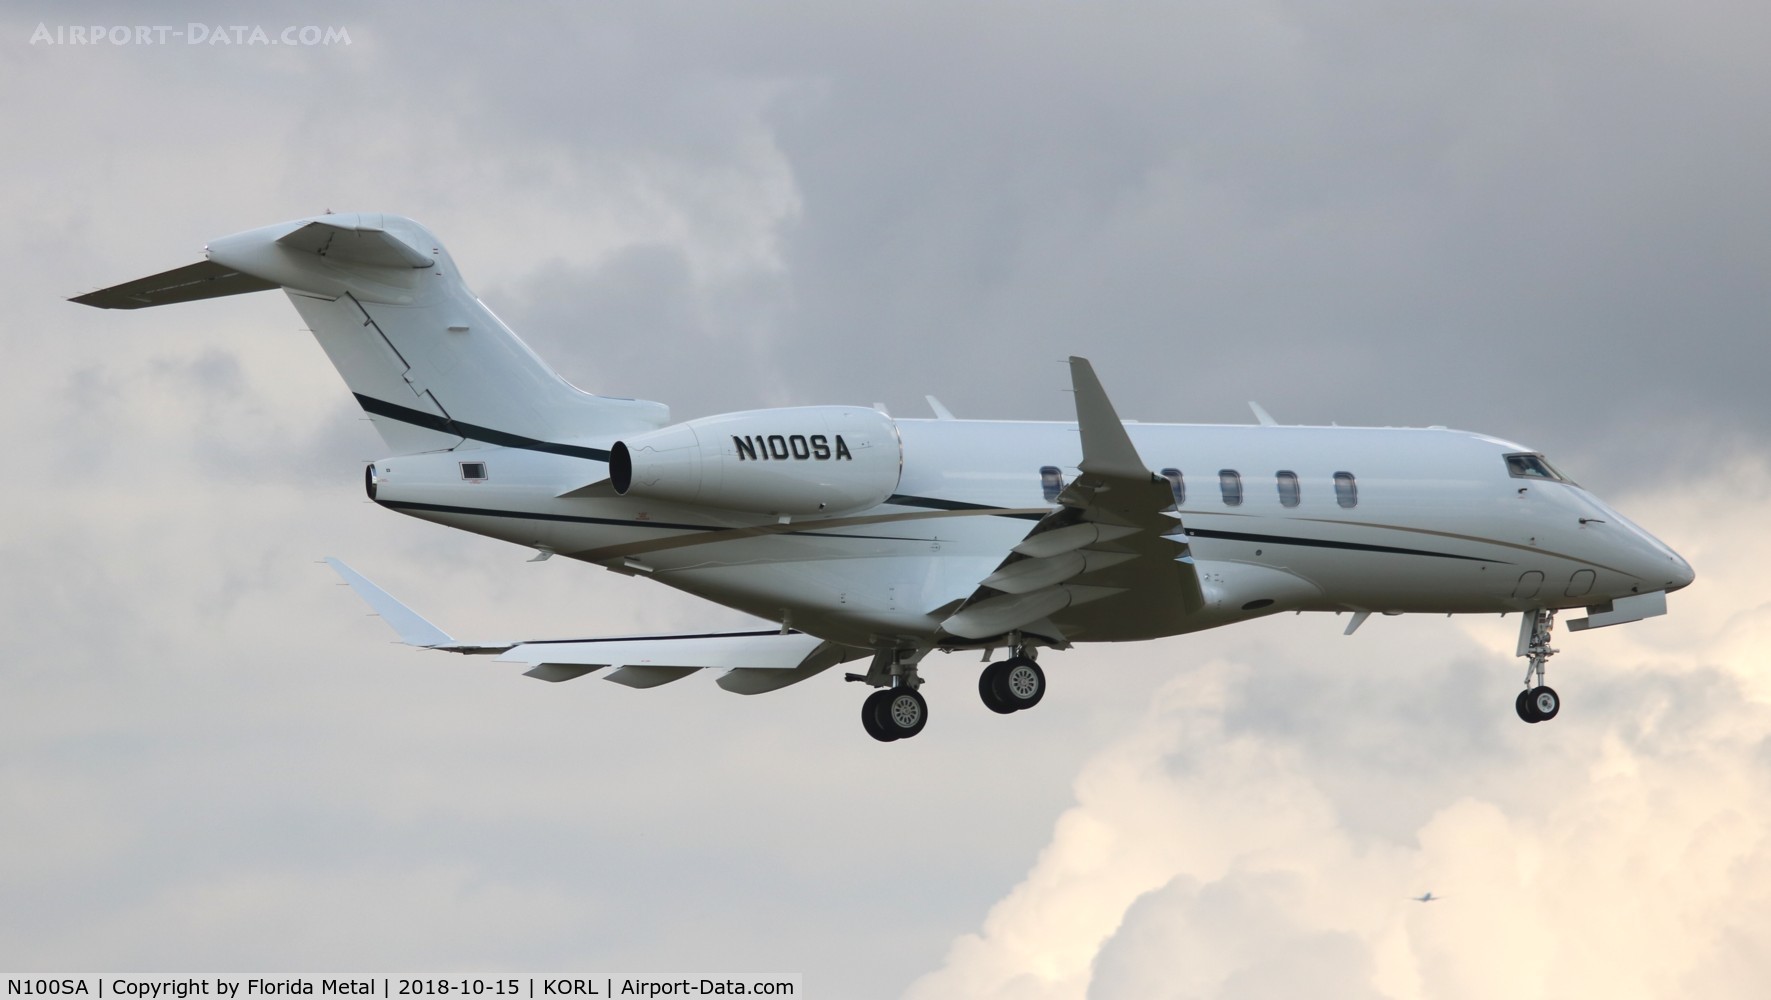 N100SA, 2015 Bombardier Challenger 350 (BD-100-1A10) C/N 20559, Challenger 350 zx